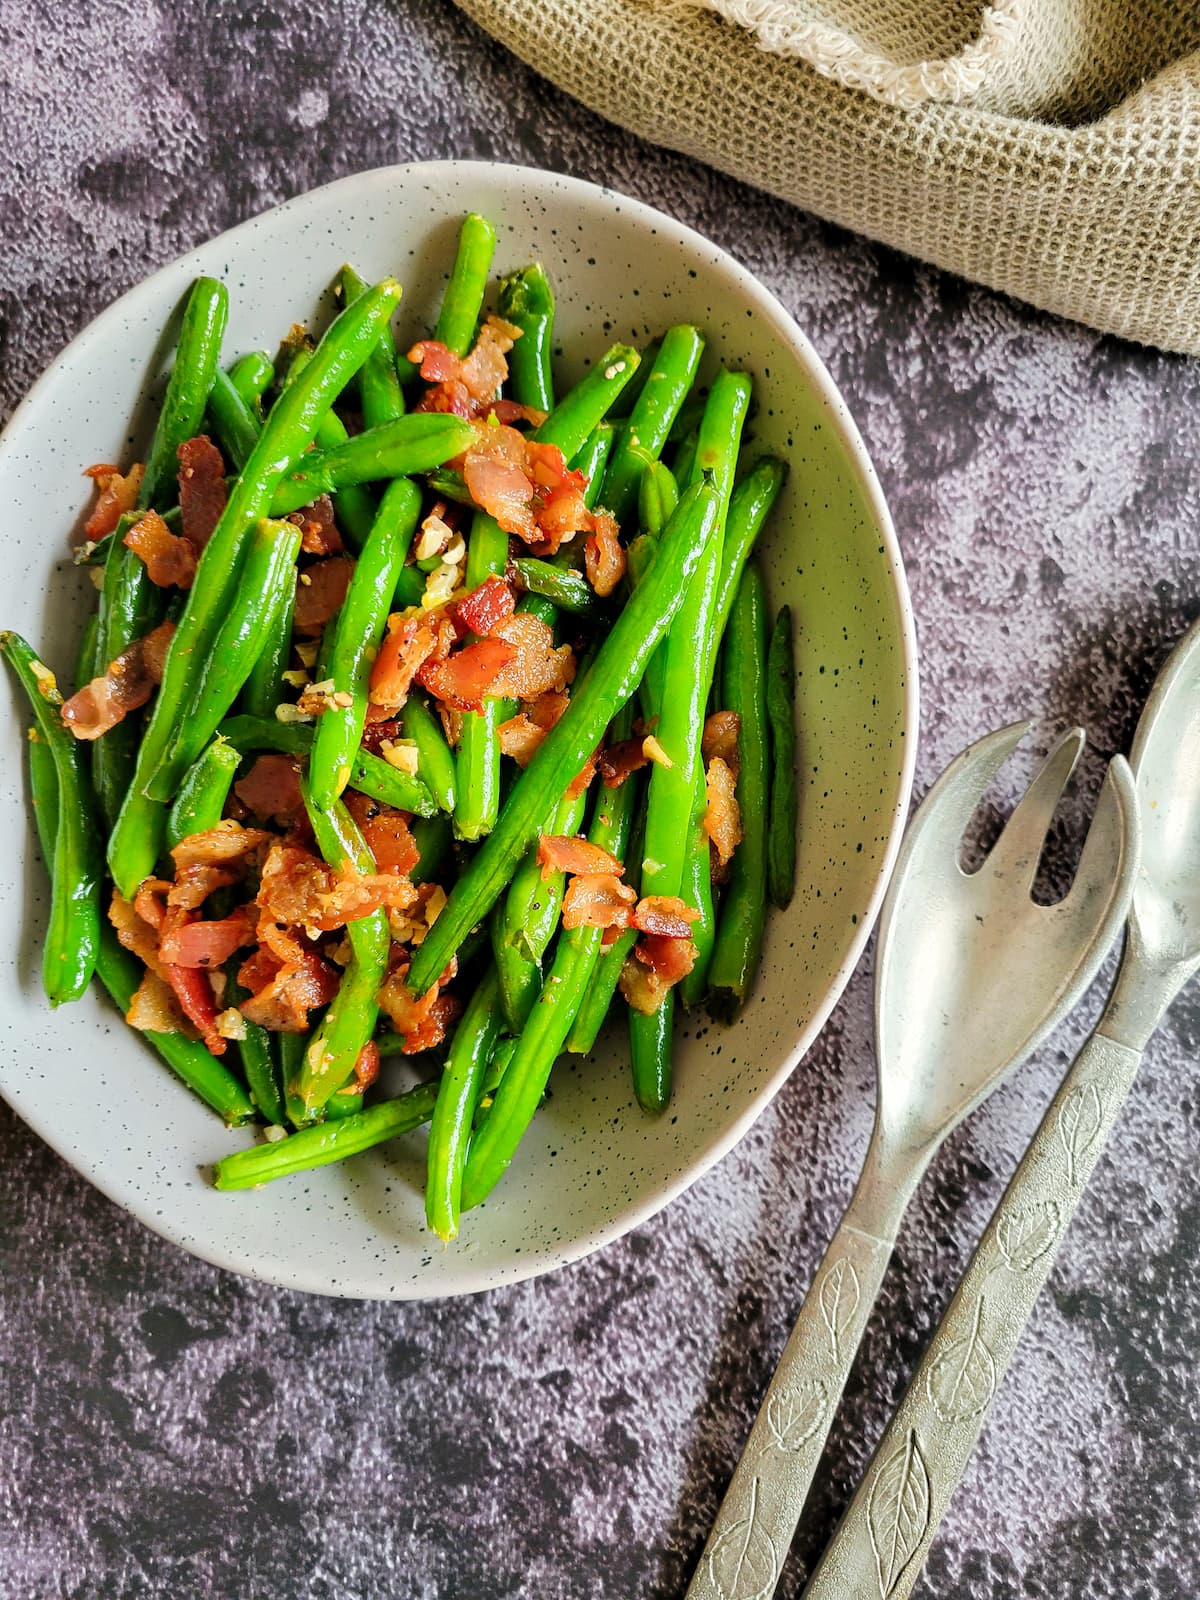 bowl of bacon, green beans and garlic next to serving spoons